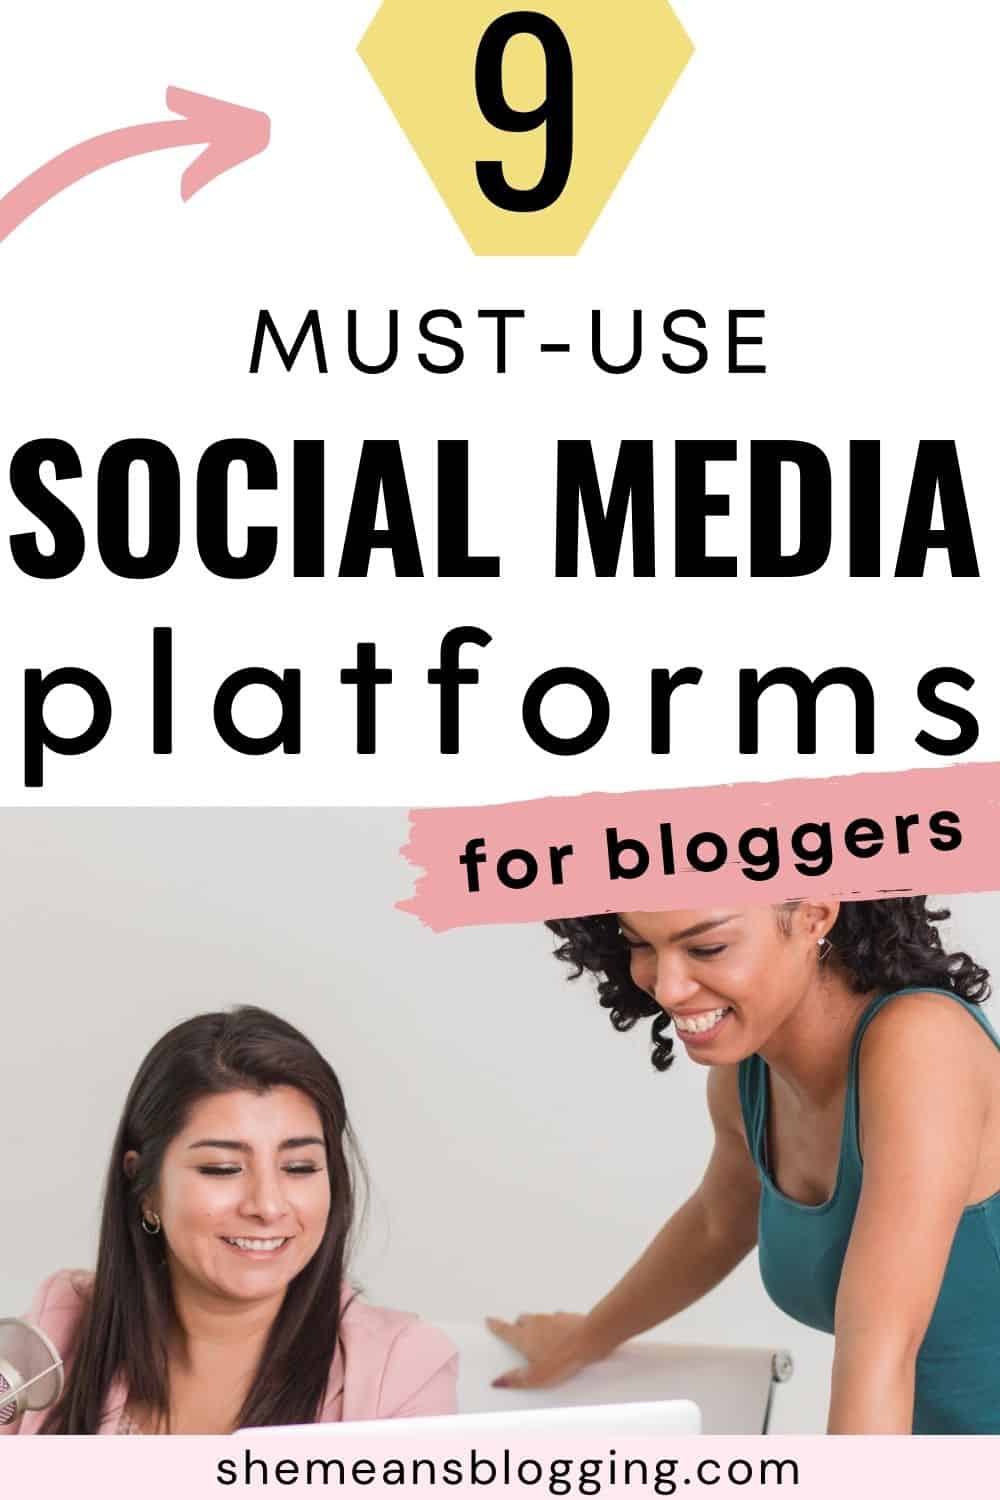 Wondering, how to promote your blog on social media? Check out popular and best social media platforms for bloggers. Click to find out top social media platforms for blogging